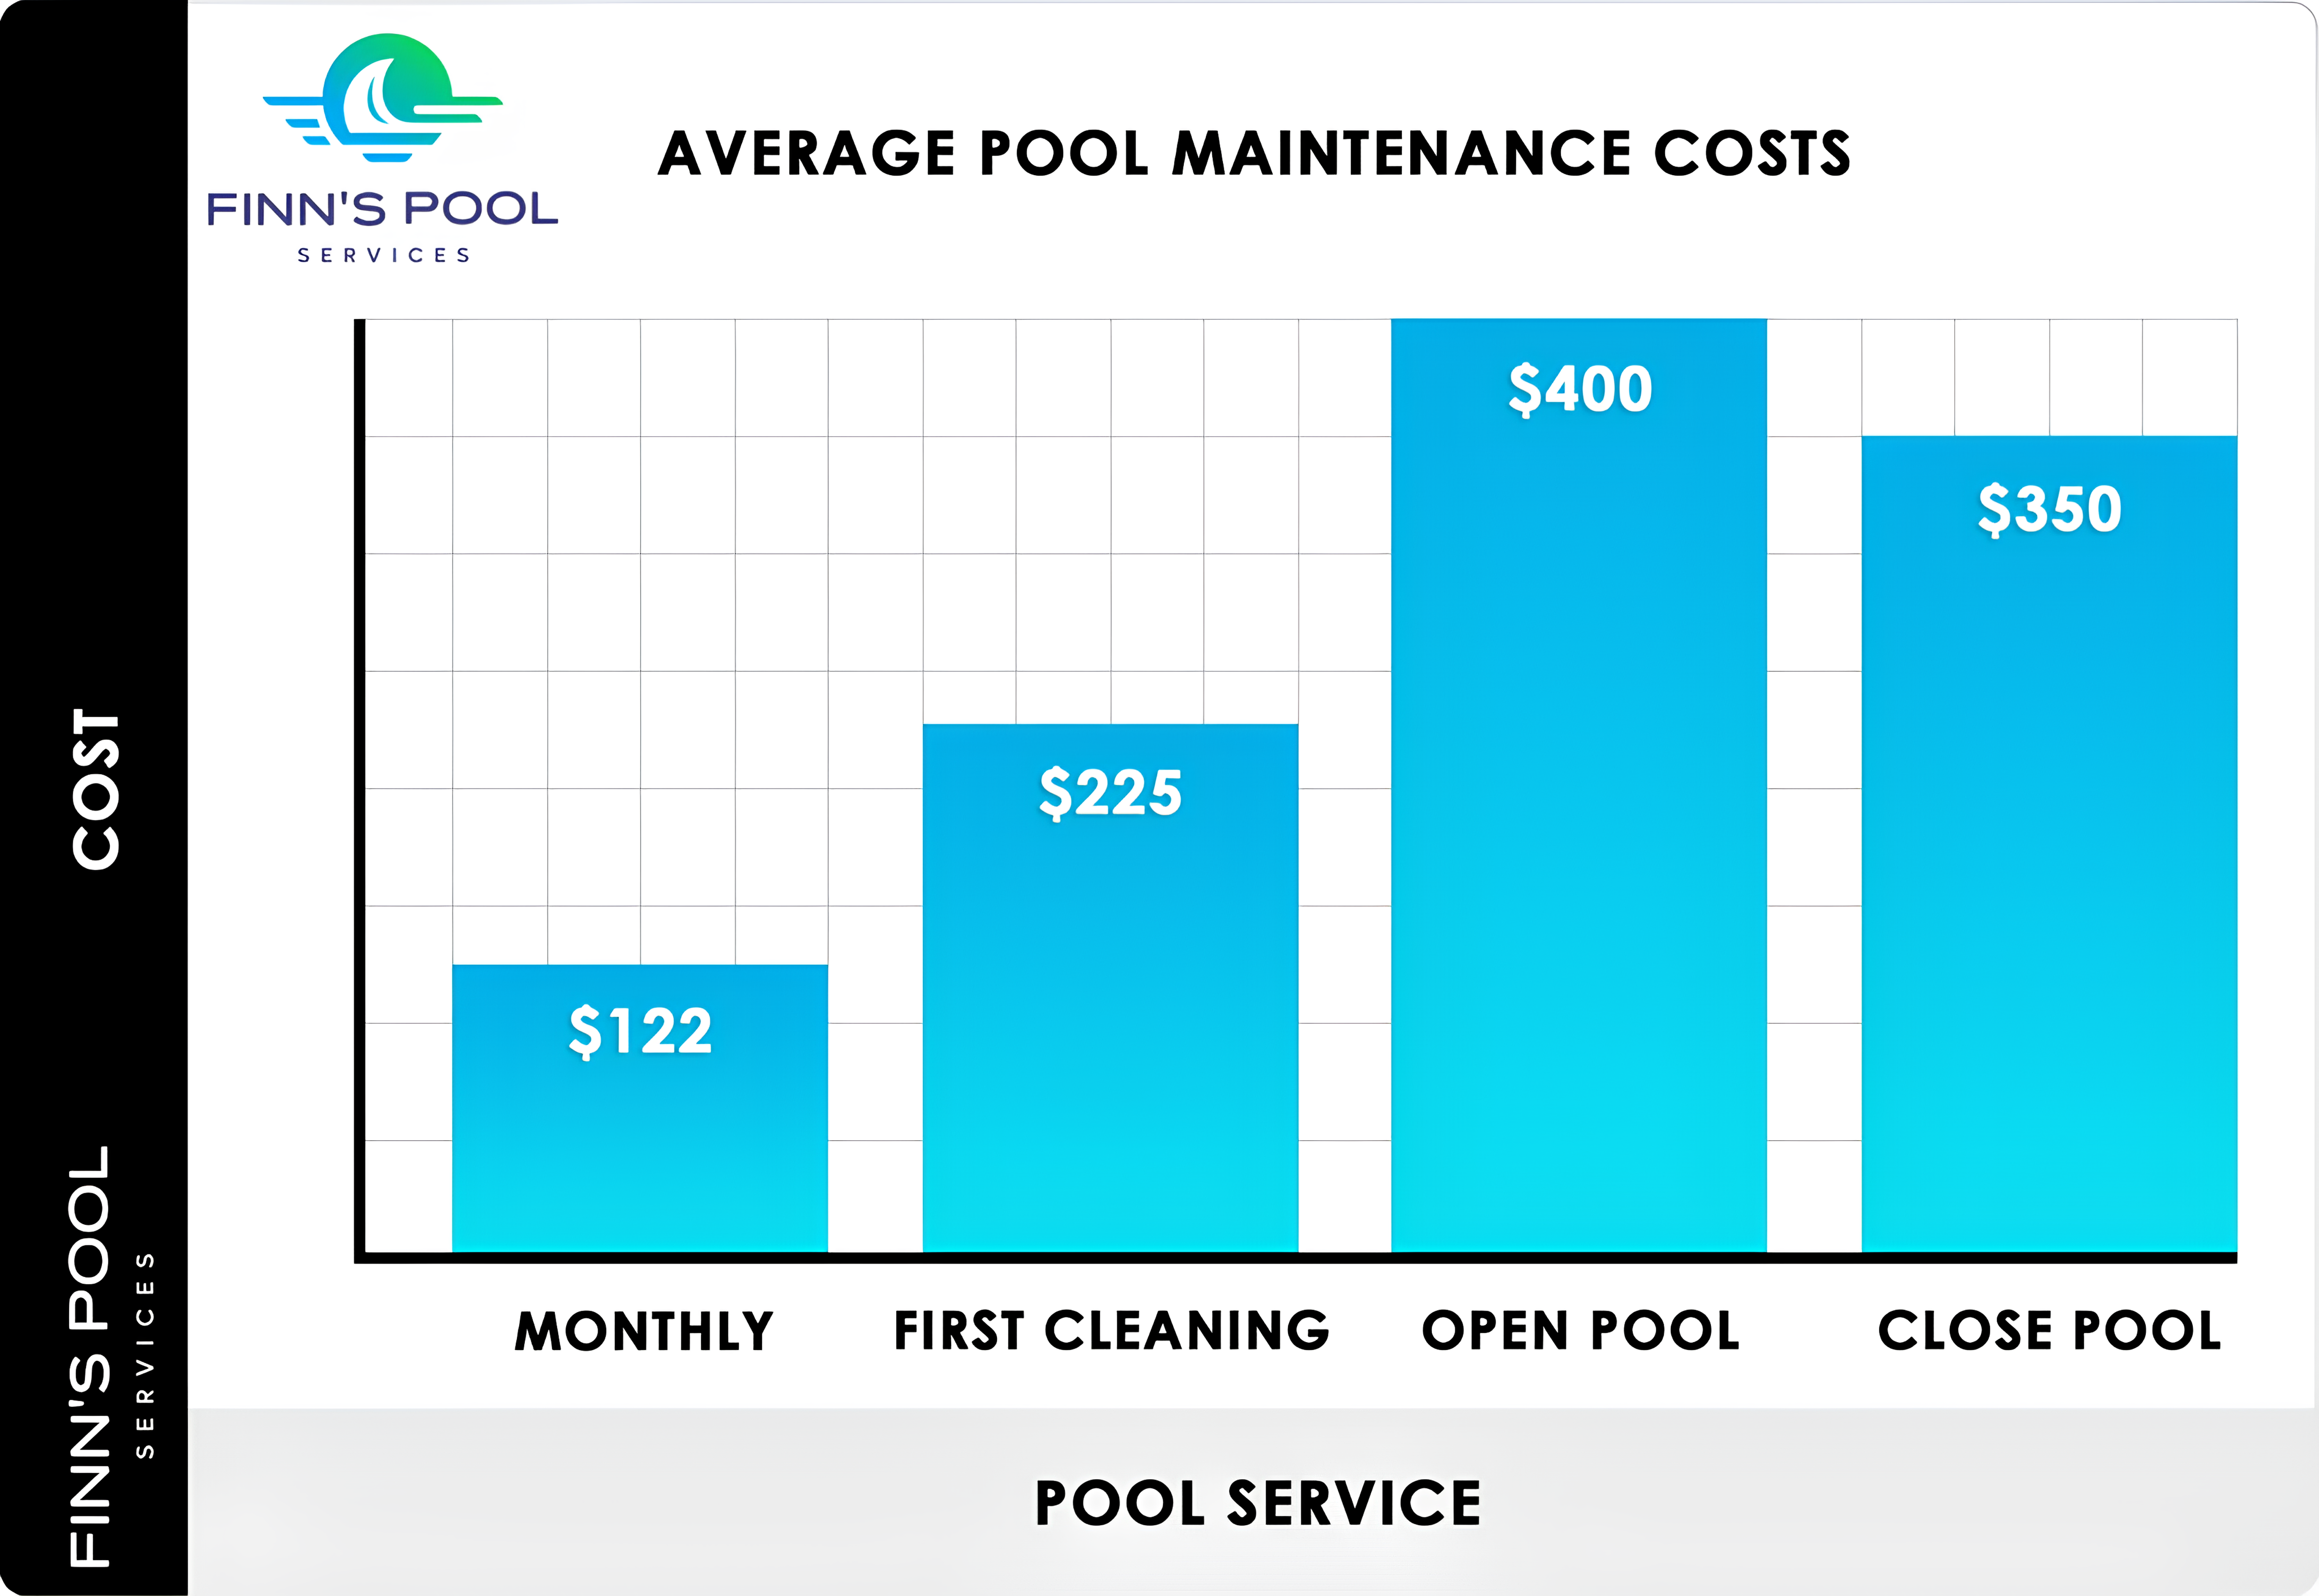 HOW MUCH DOES POOL SERVICE COST